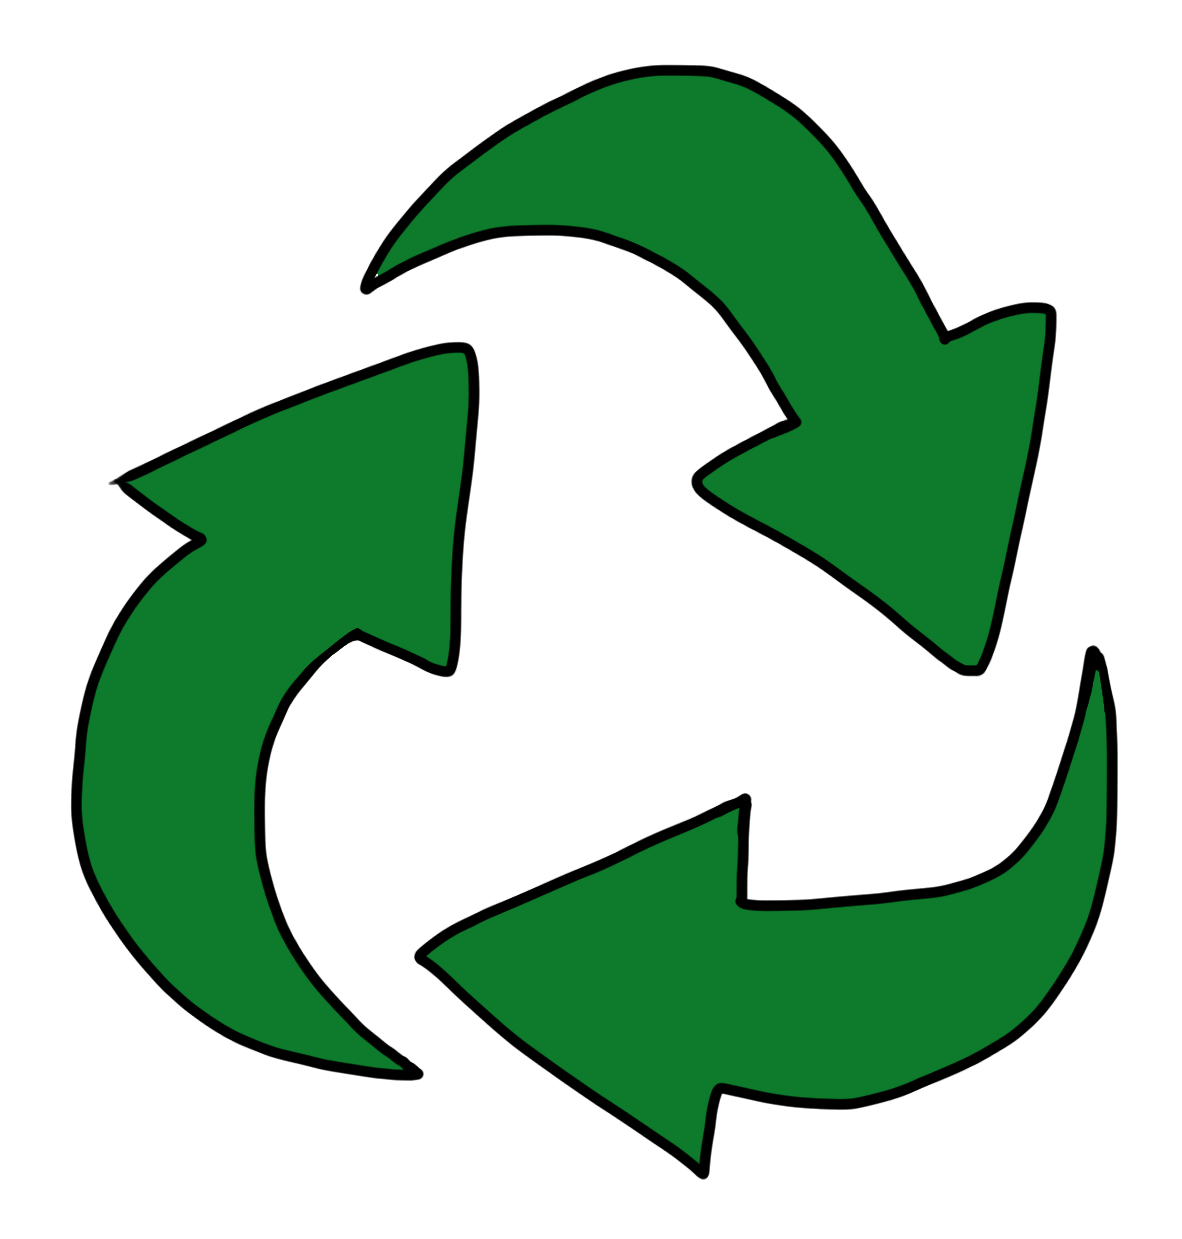 Recycle free recycling clip art clipart clipart image